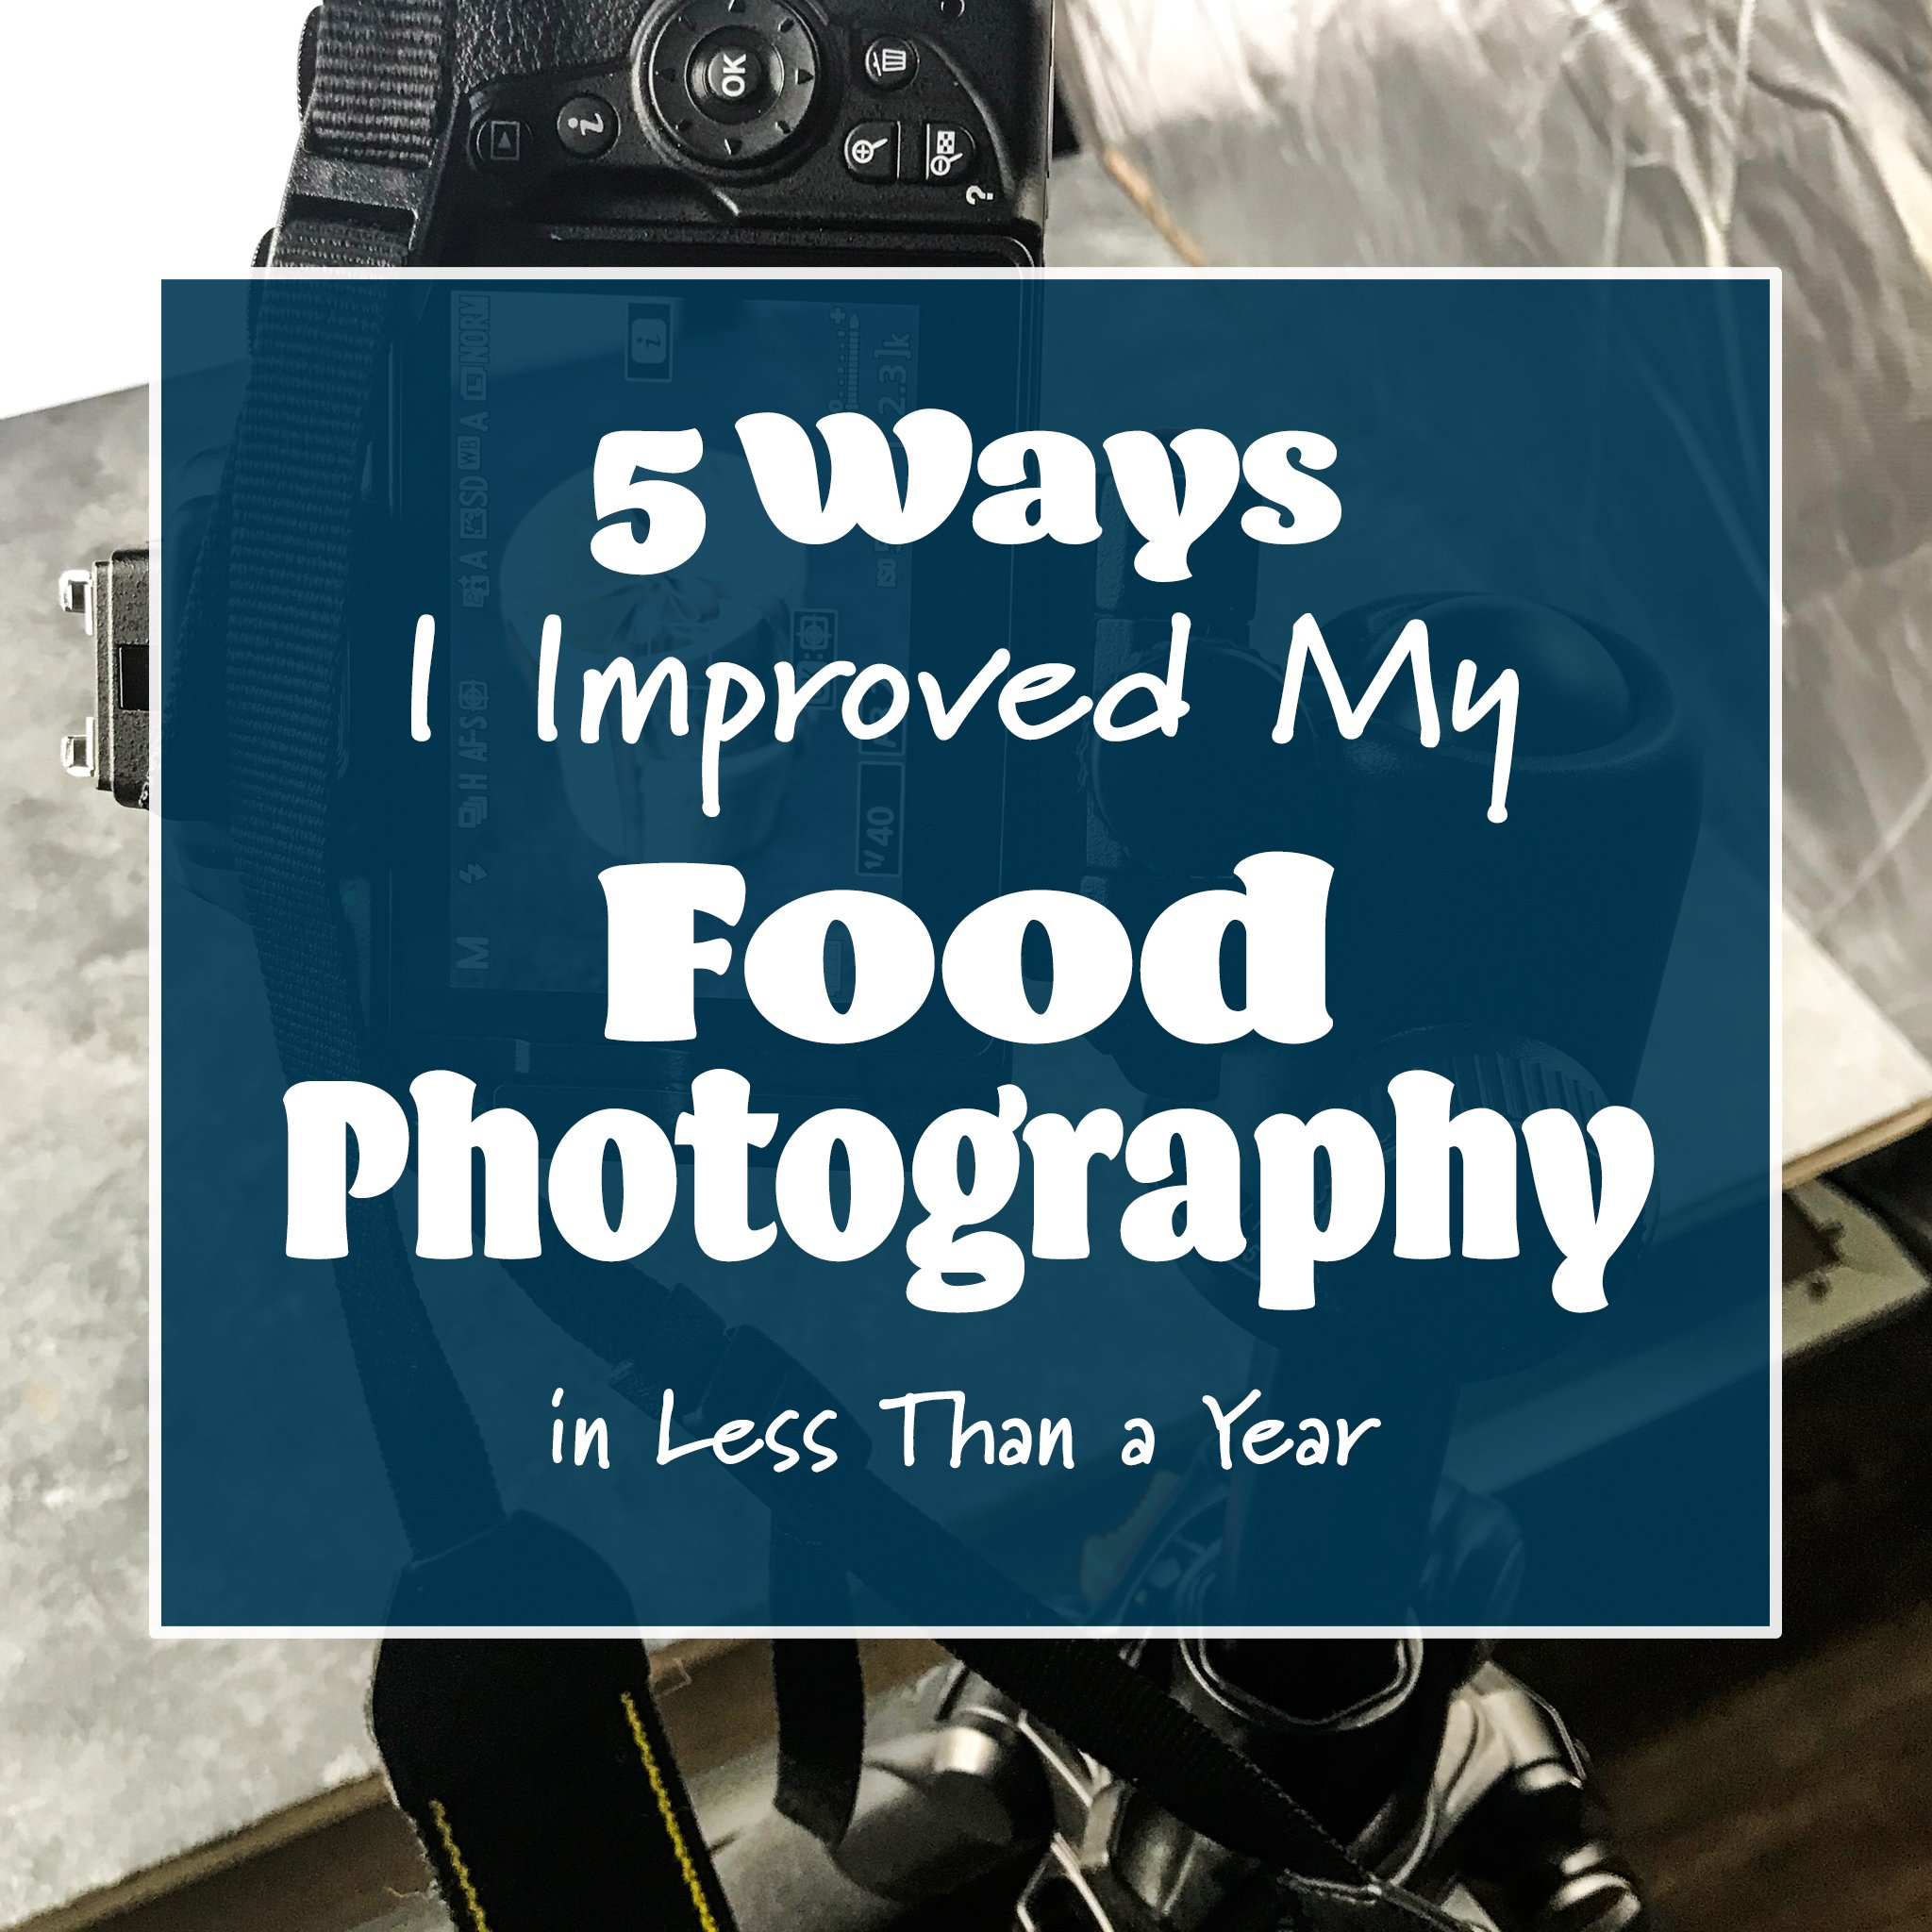 Cover photo for 5 Ways I improved my Food Photography in Less Than a Year.